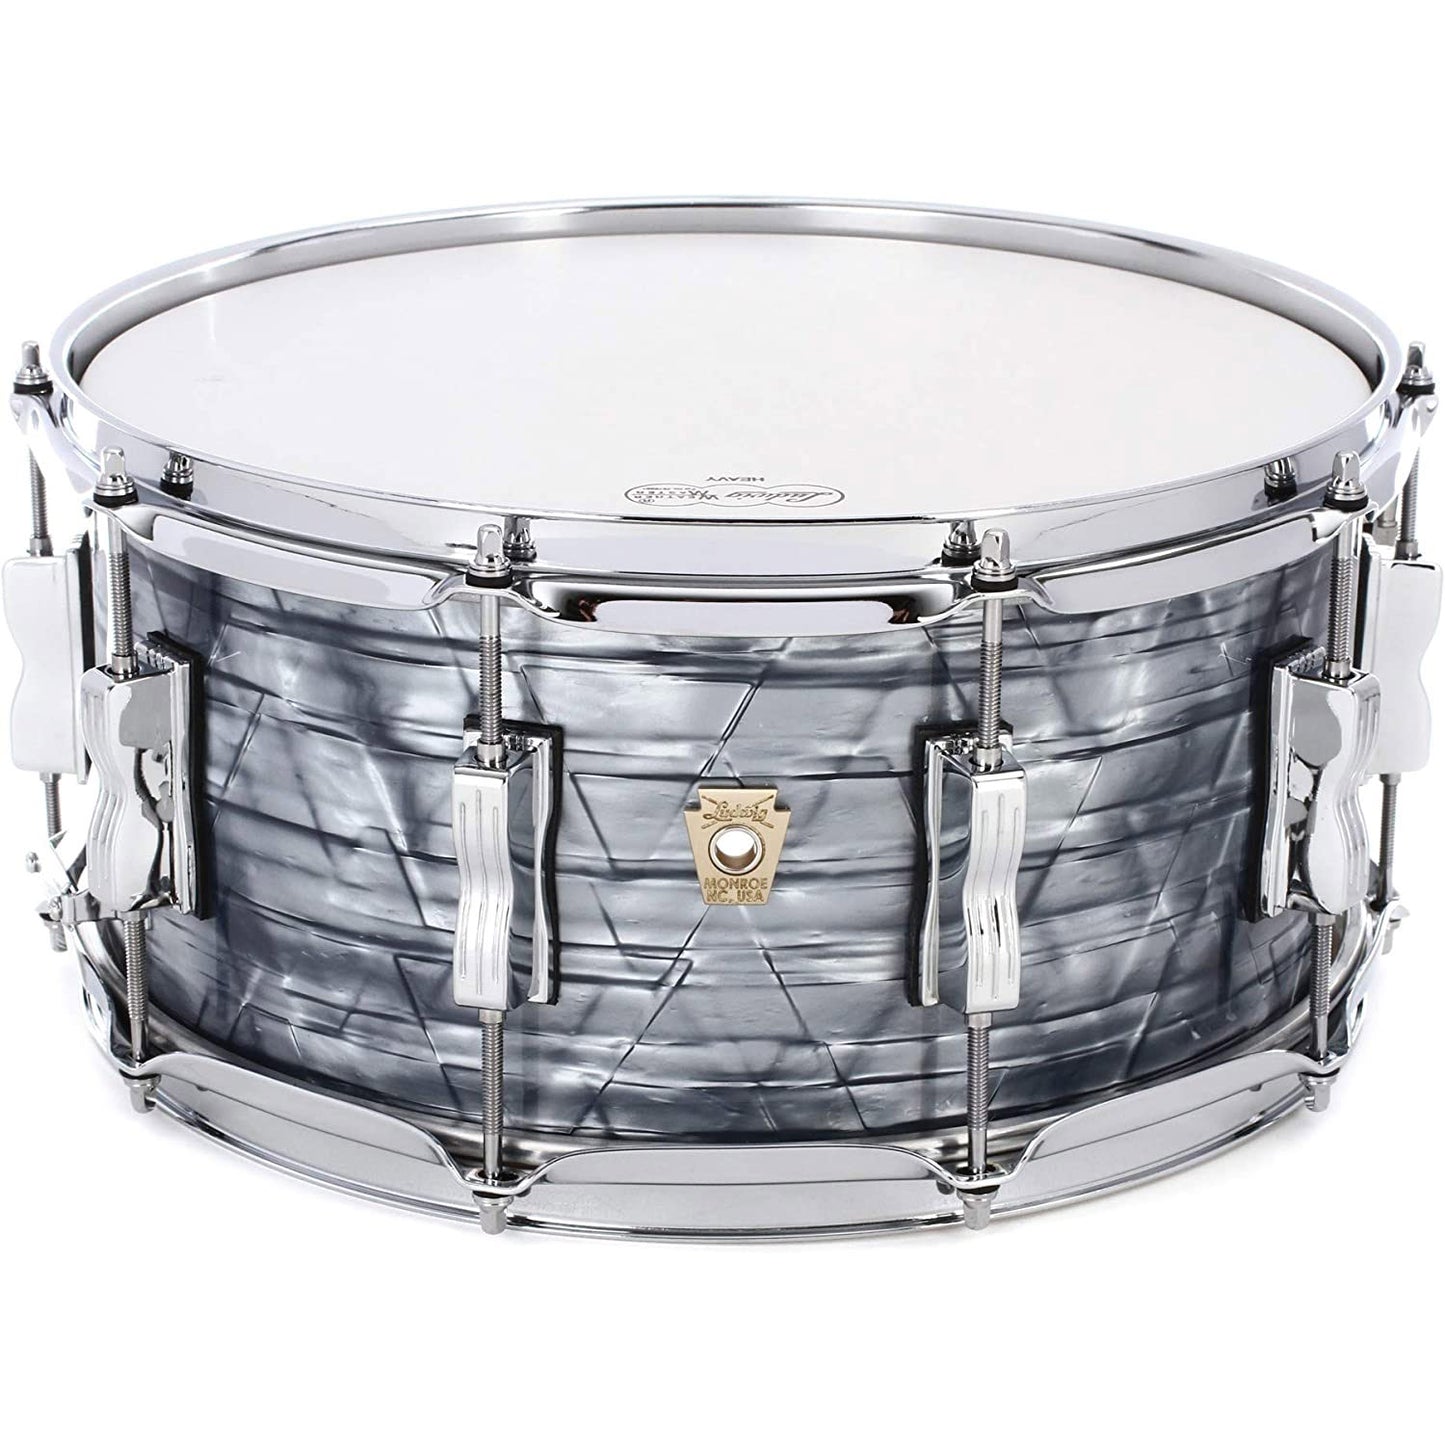 Ludwig Classic Maple Snare Drum - 6.5x14 Inches Sky Blue Pearl